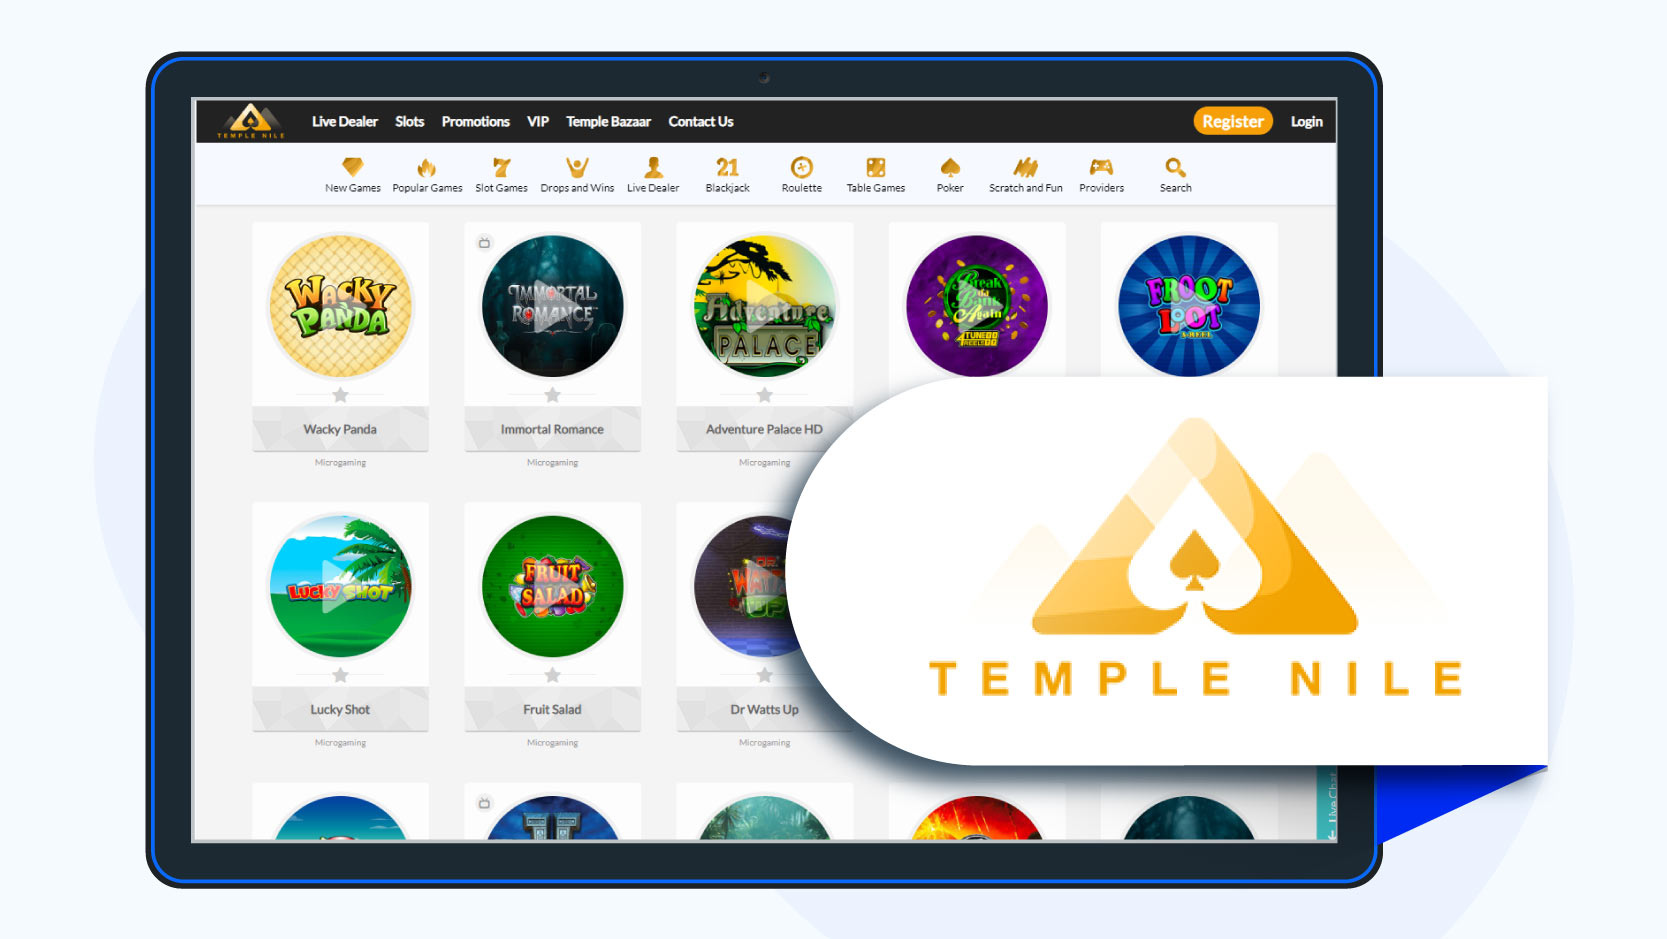 Temple Nile Casino – Best New Casino with Microgaming